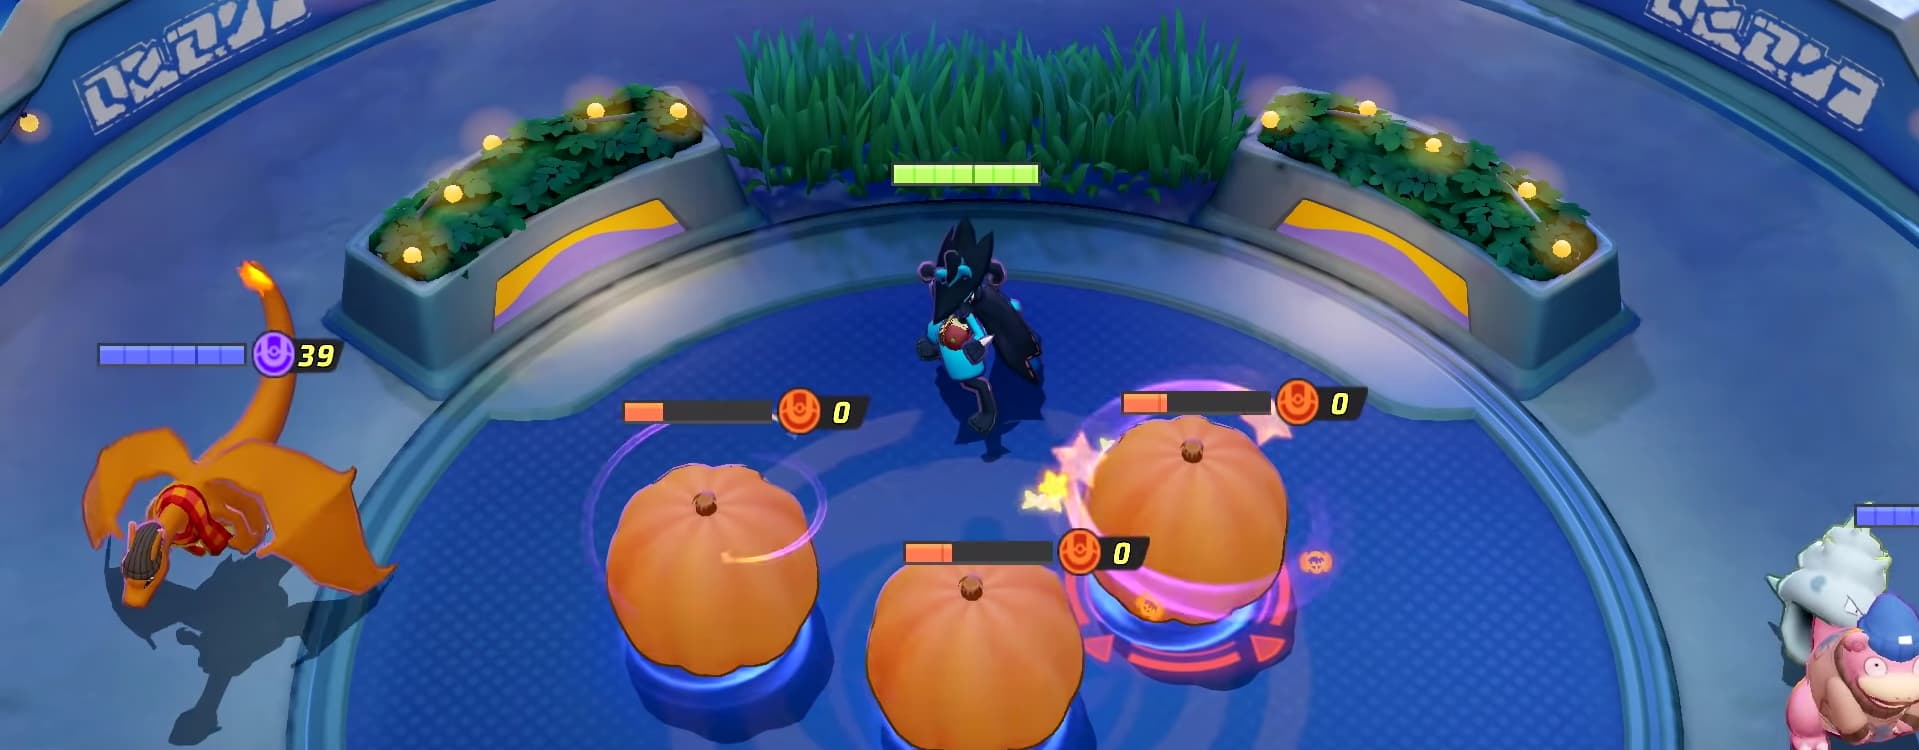 Screenshot from Pokemon Unite's Halloween Festival, where we see Charizard and 3 pumpkins line up in the center of the arena 